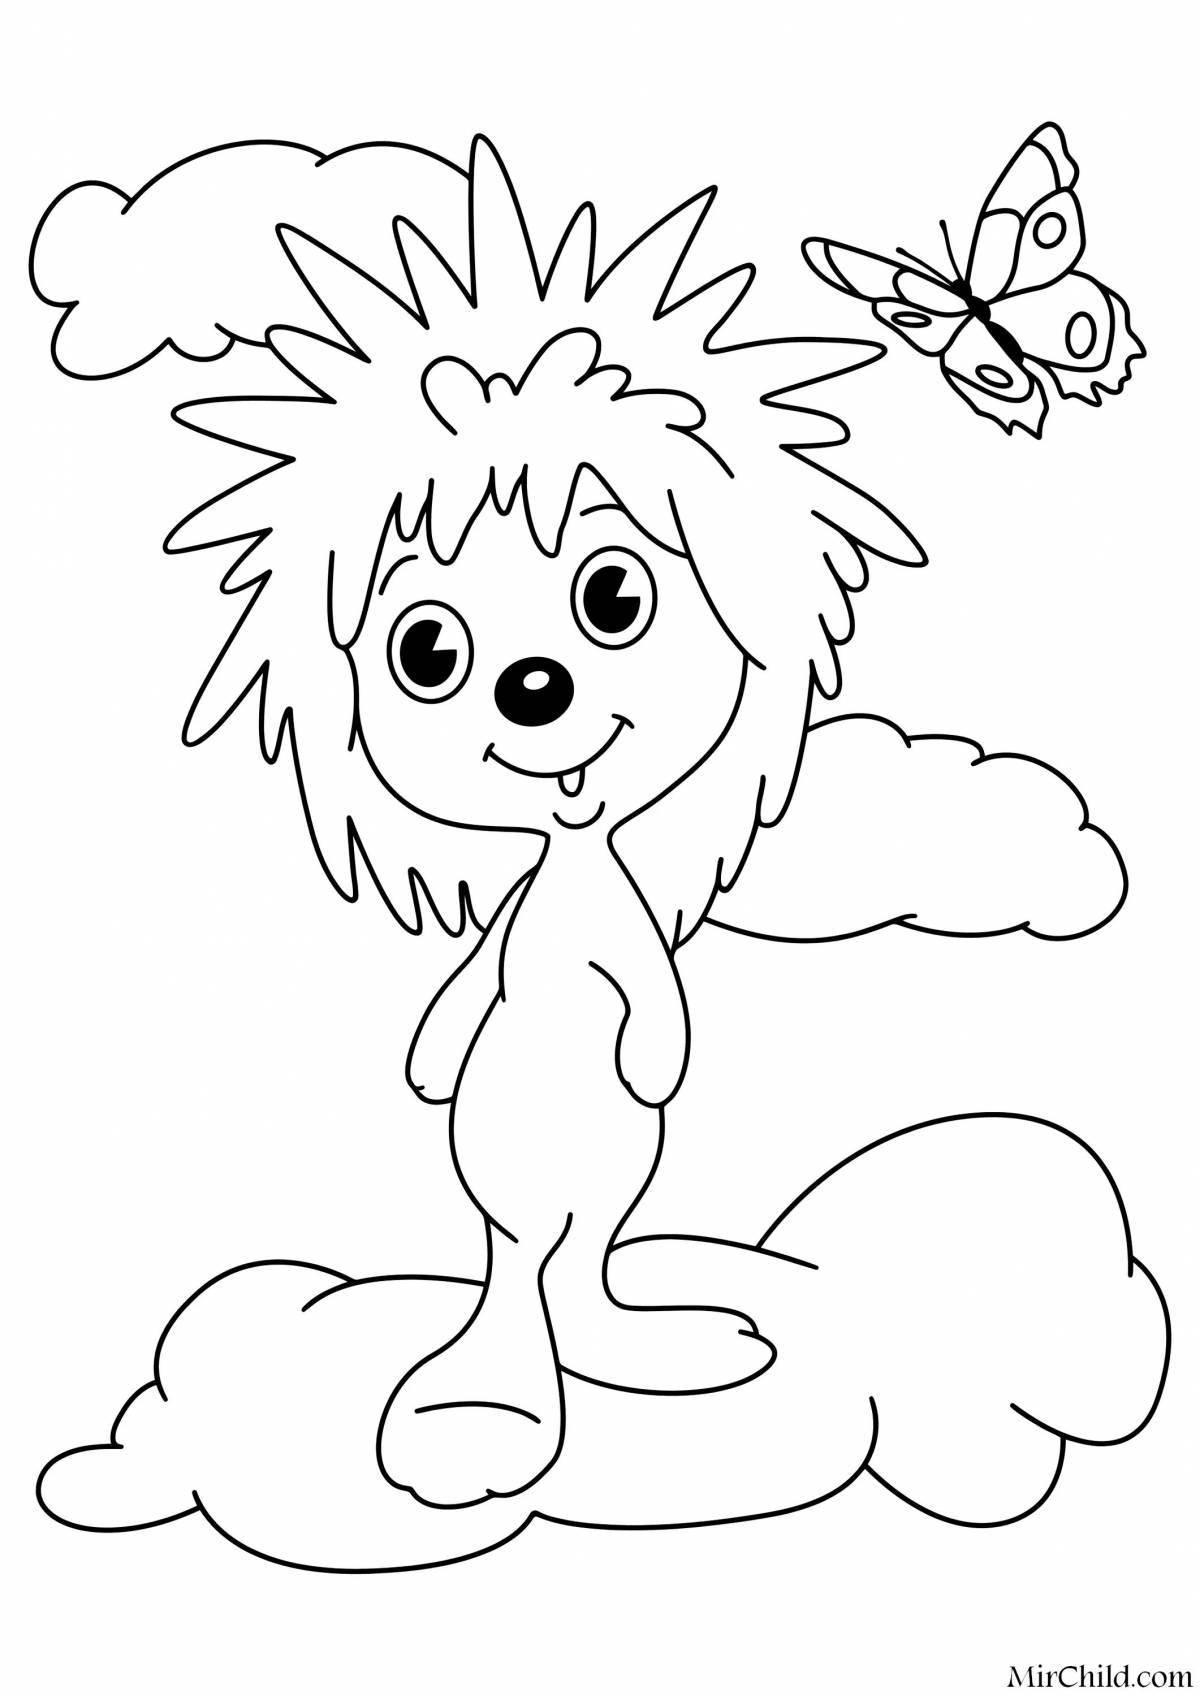 Snuggly coloring page hedgehog and teddy bear